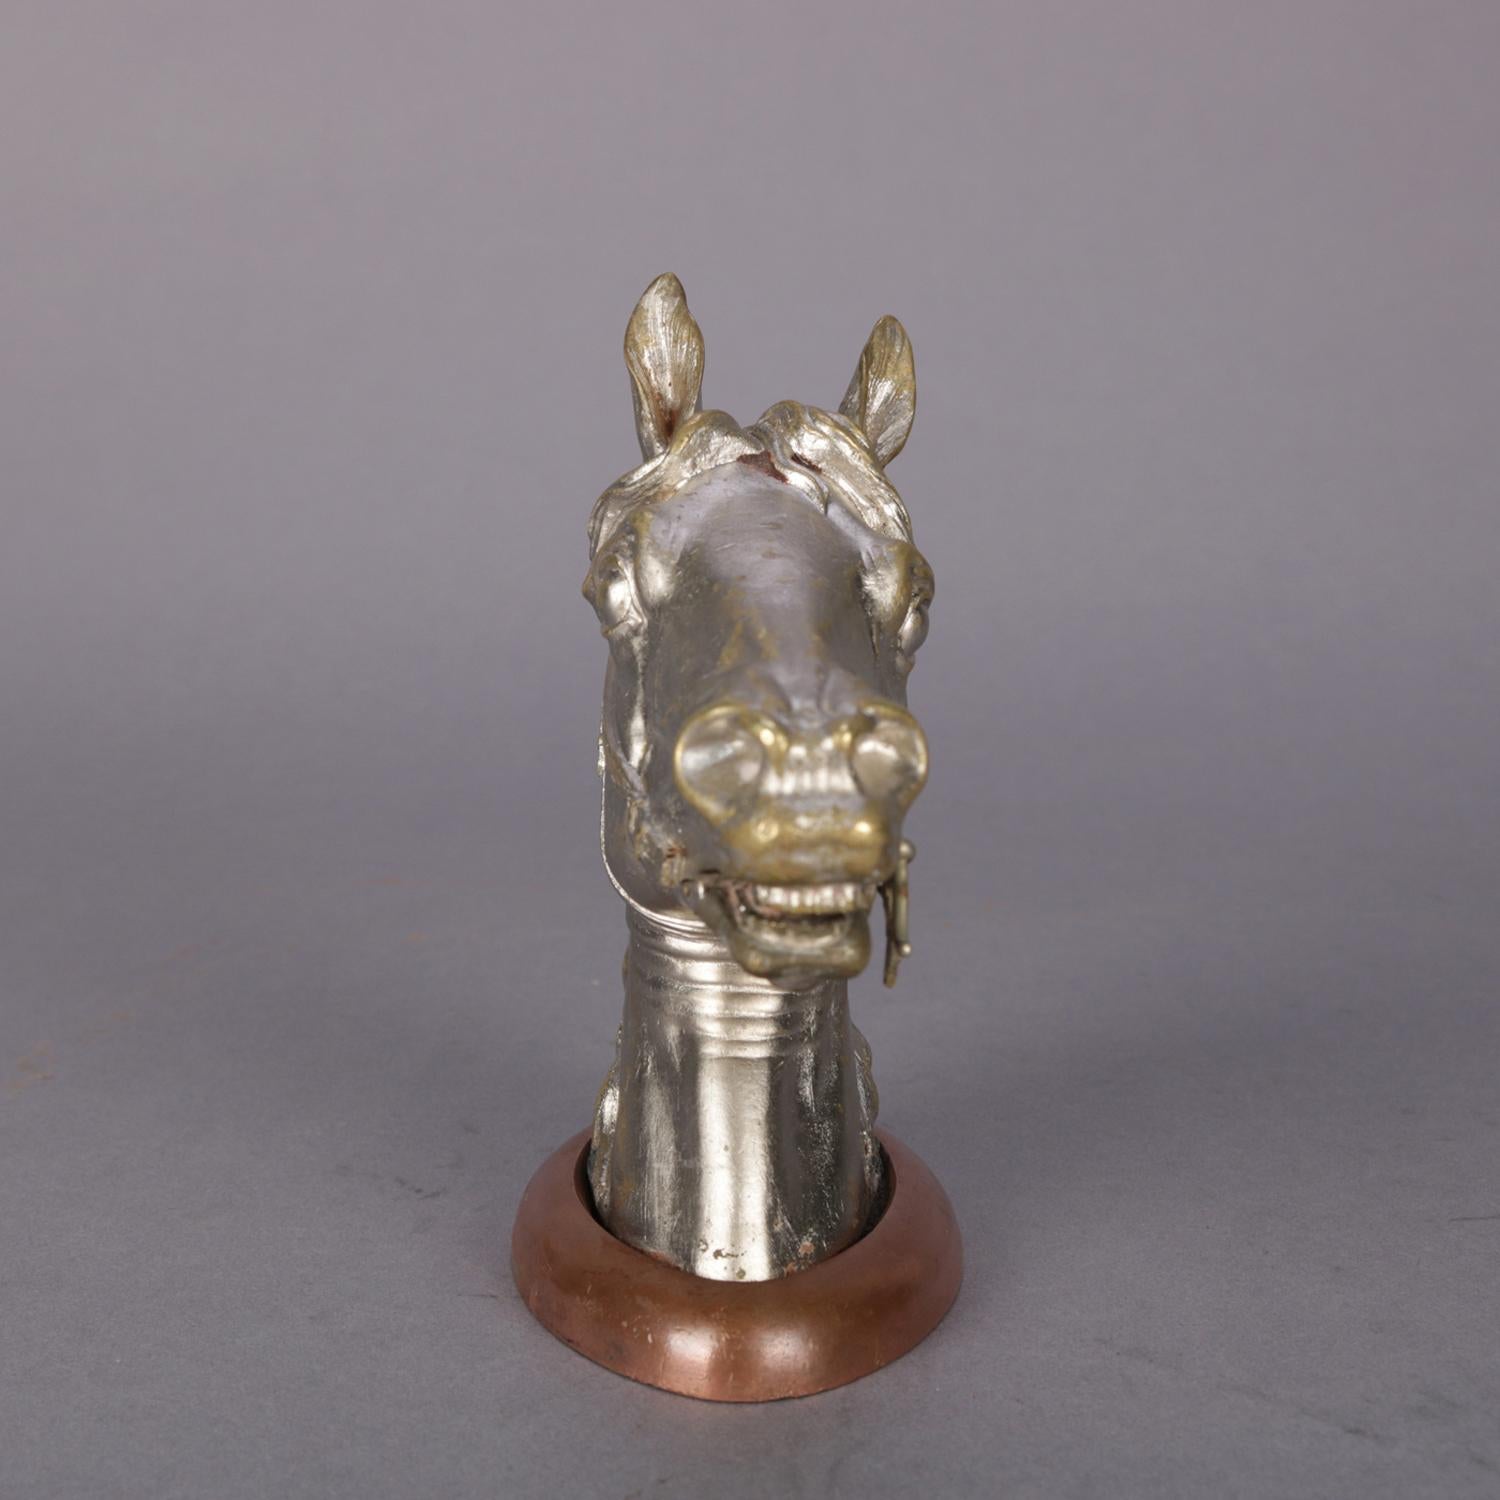 An antique Vienna, Austria figural Franz Xavier Bergman (Austrian, 1861-1926) equestrian cold painted bronze inkwell featuring horse head form, marked on base Amphora - B, gilt silver, circa 1900.

***DELIVERY NOTICE – Due to COVID-19 we are